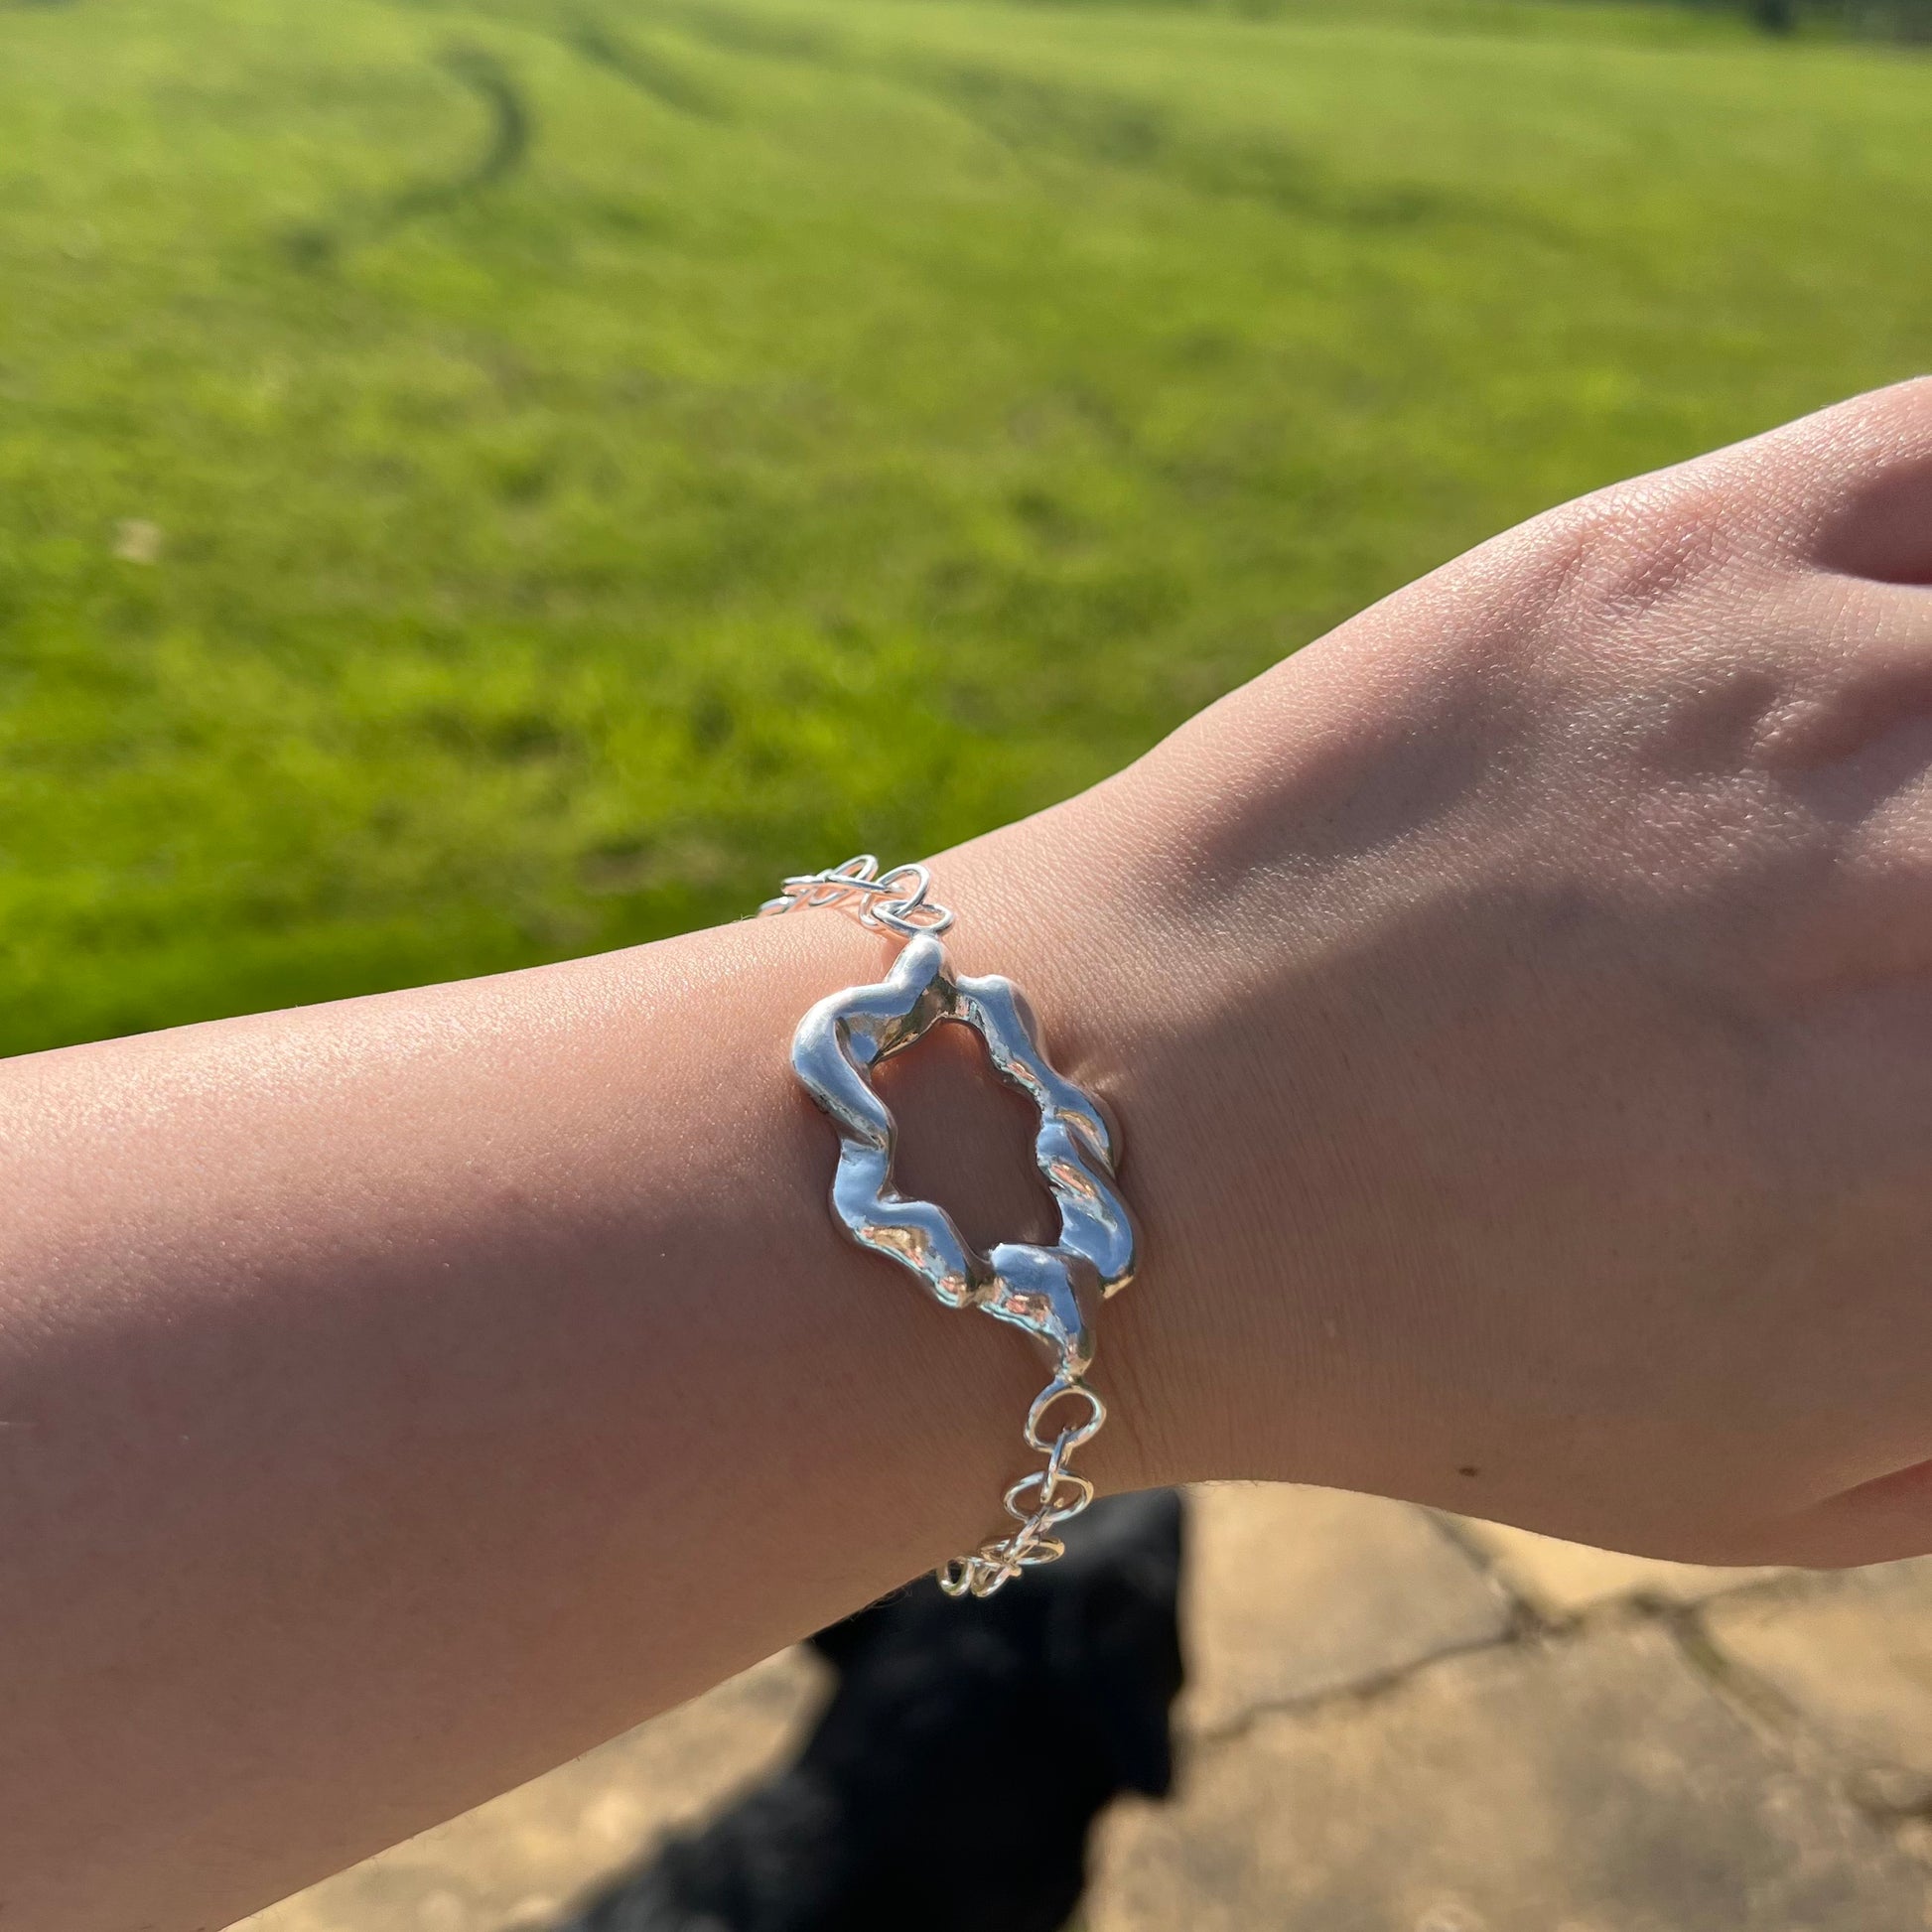 A chunky handmade sterling silver bracelet on a wrist. The centrepiece of the bracelet is shaped like a cloud and the background is of grass. a stone patio and a labrador.